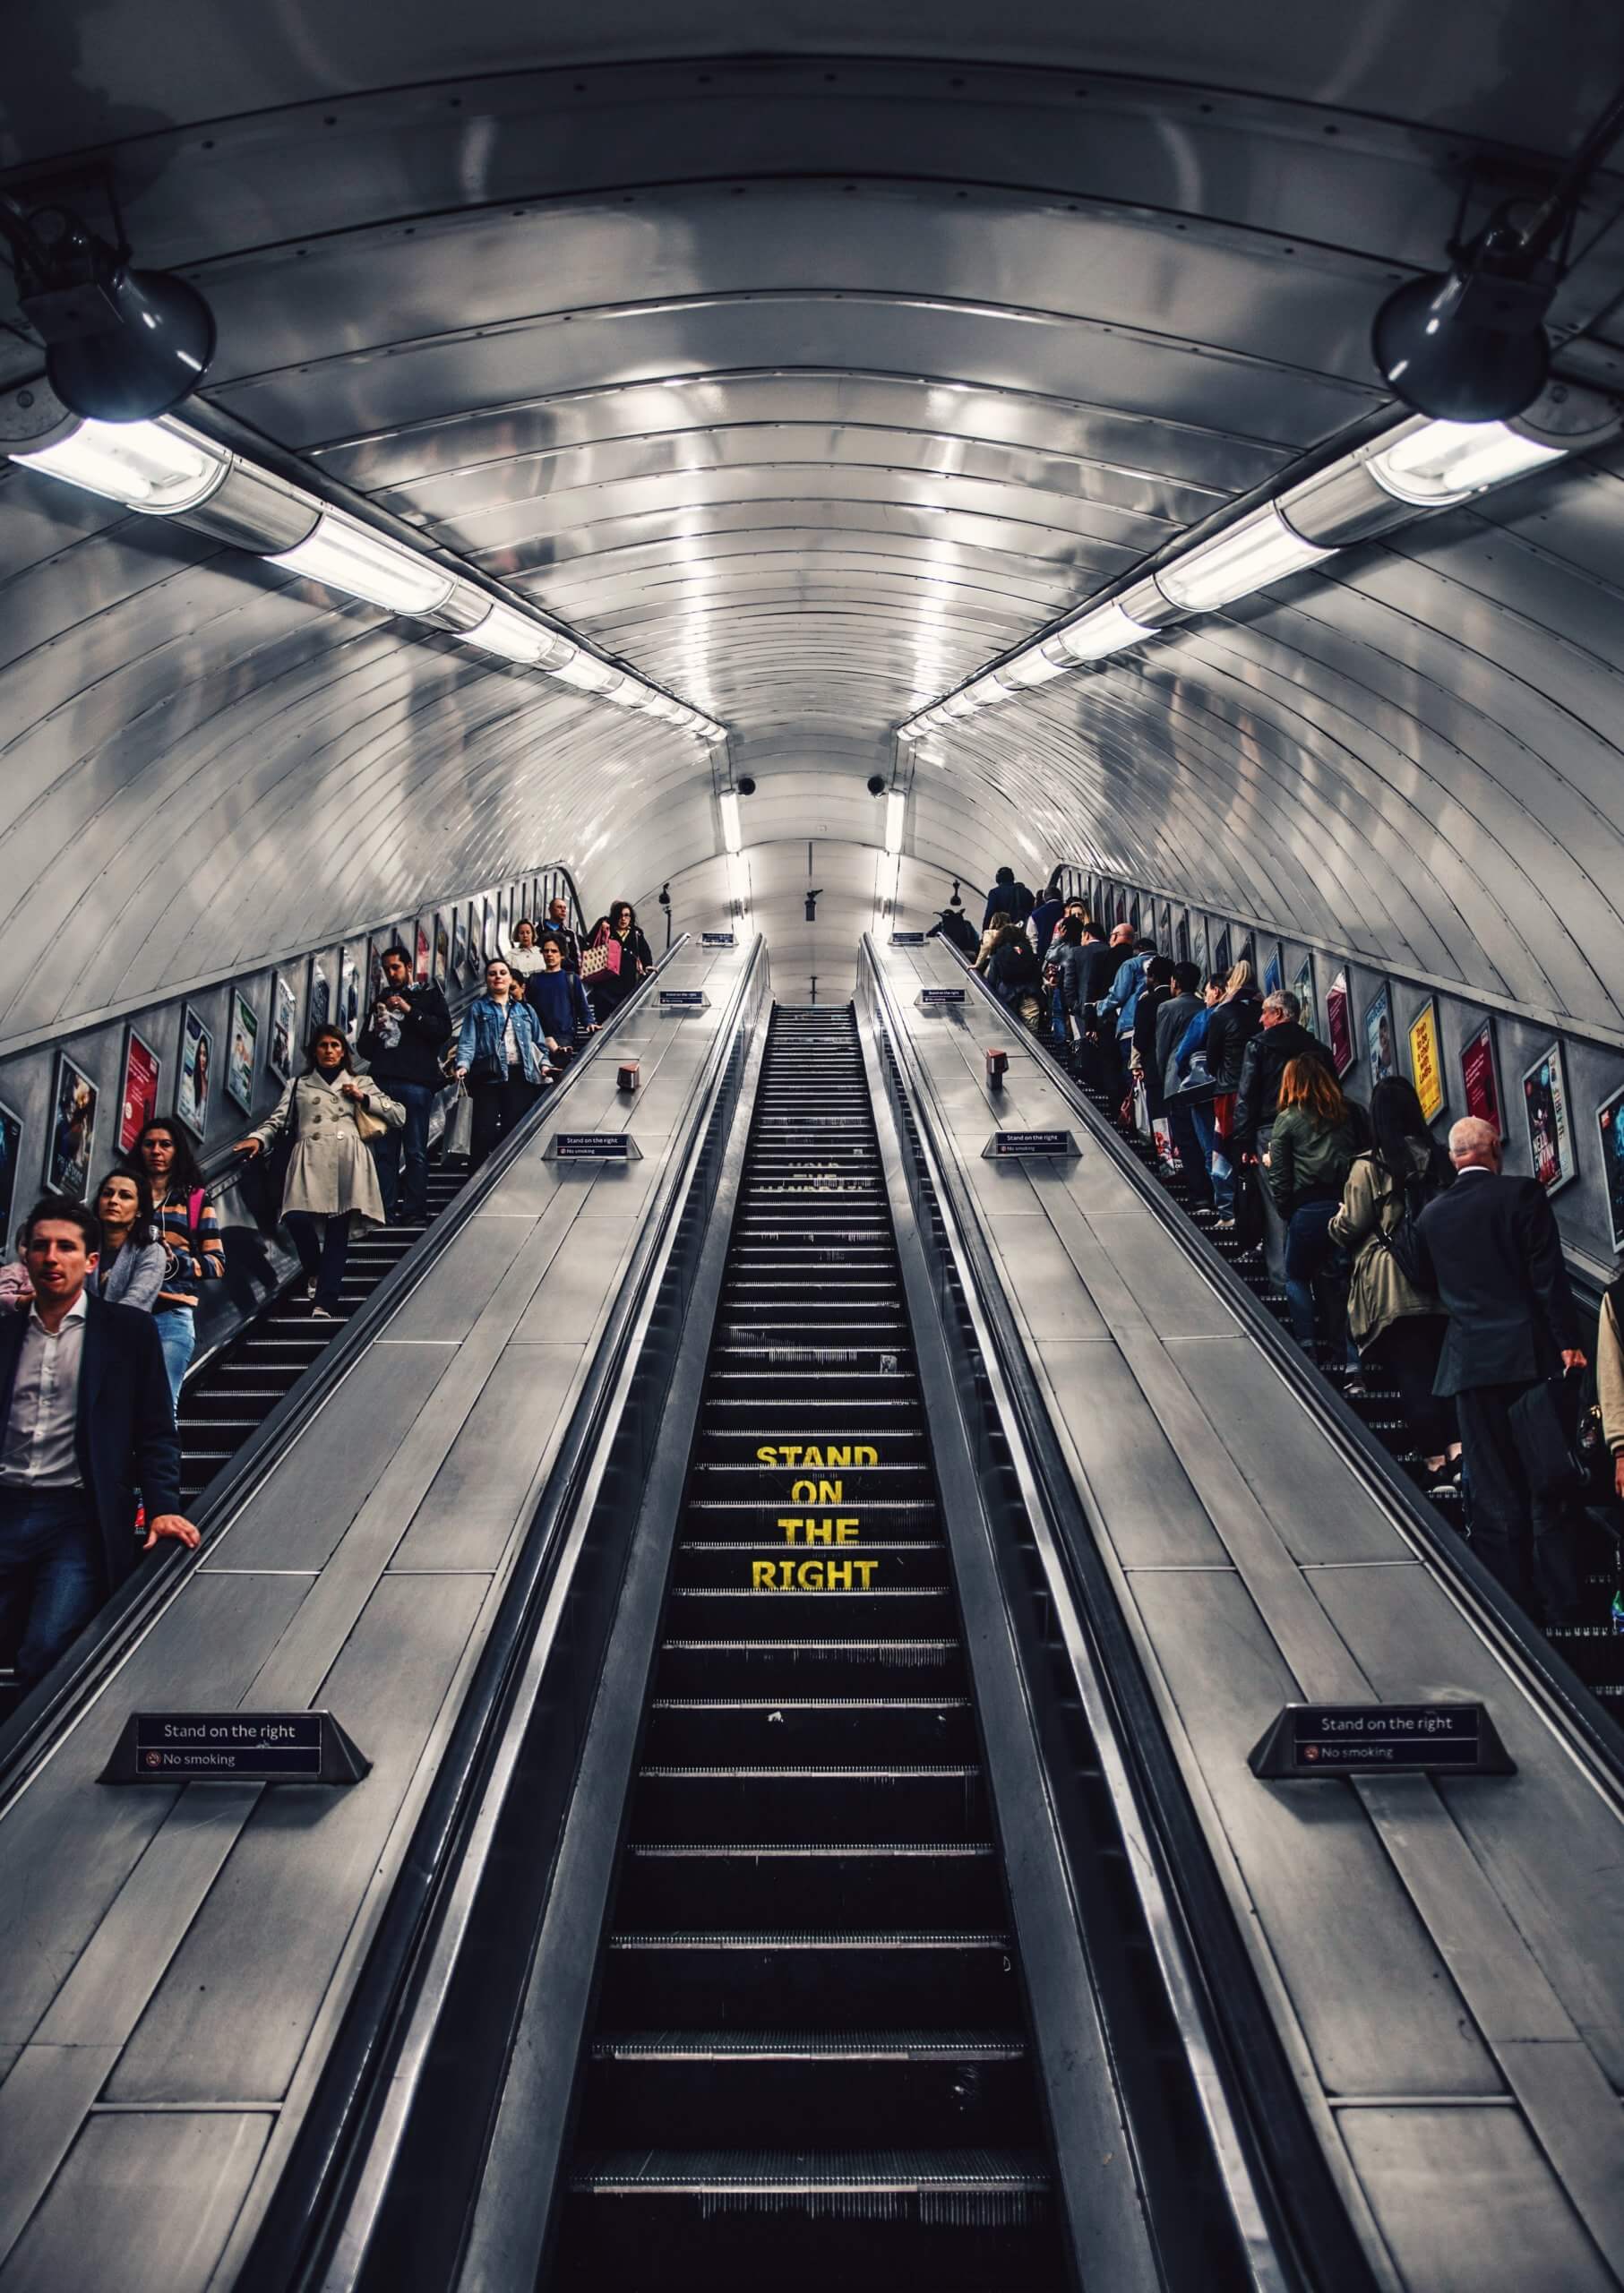 Stand on the Right, London Underground, England